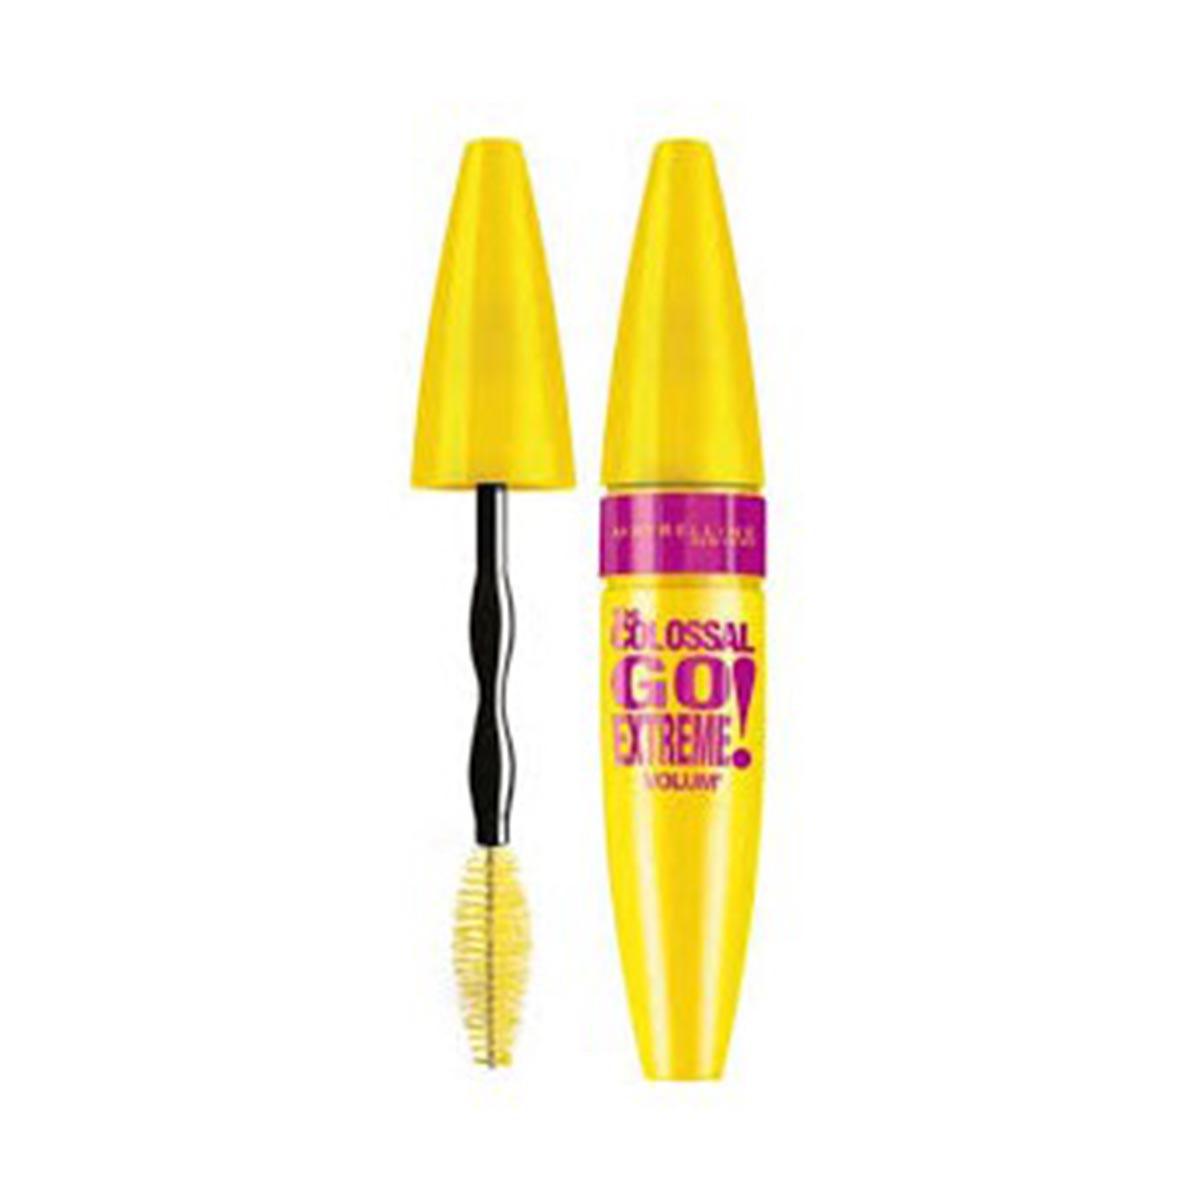 maybelline-the-colossal-go-extreme-004-radi